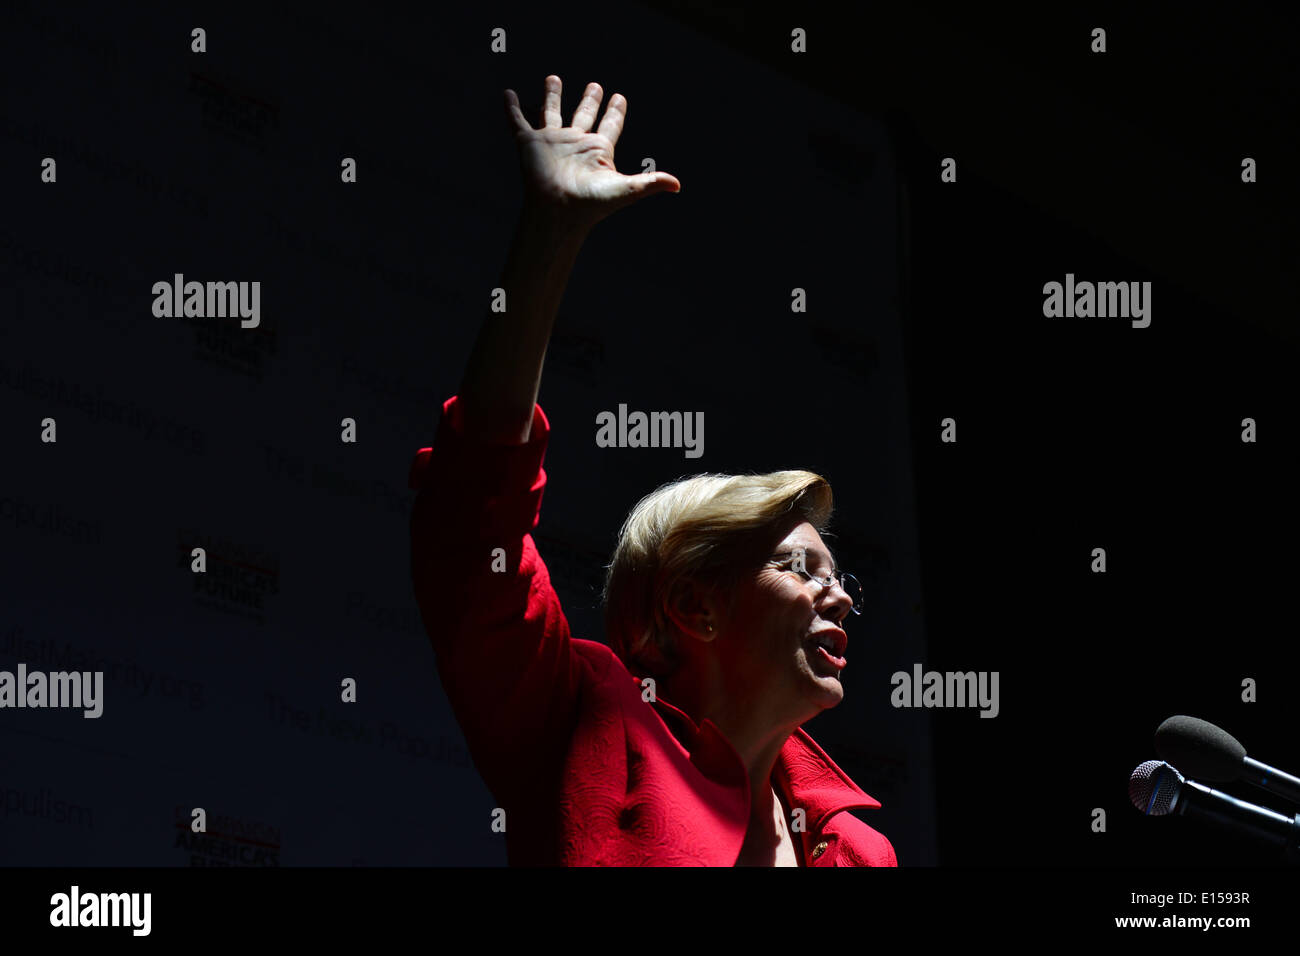 May 22, 2014 - Washington, District of Columbia, US - Sent. ELIZABETH WARREN, (D-Mass) speaks during The New Populism Conference Thursday. Liberal thinkers addressed strategies around an agenda for change on investment in Jobs, Income equality, increasing Social Security and Wall Street reform. (Credit Image: © Miguel Juarez Lugo/ZUMAPRESS.com) Stock Photo